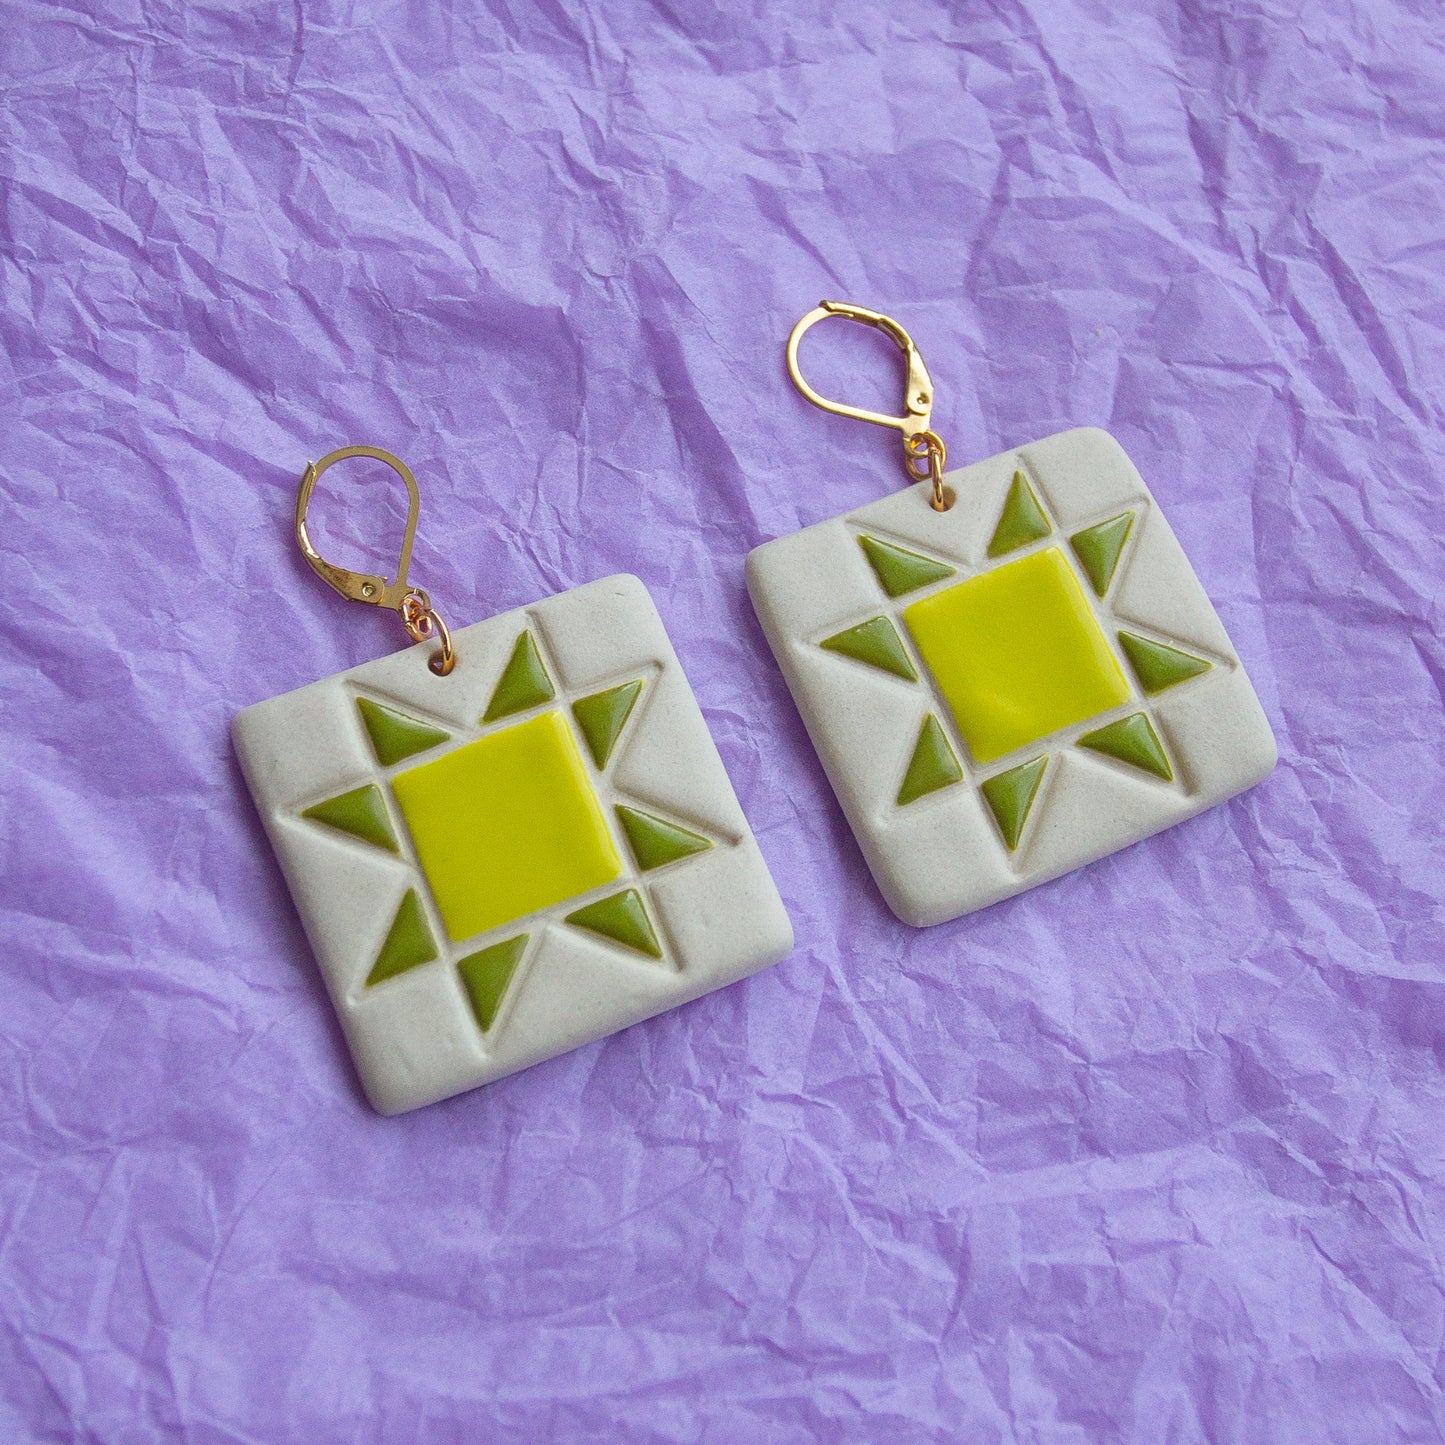 Quilt Square Earrings - Greens